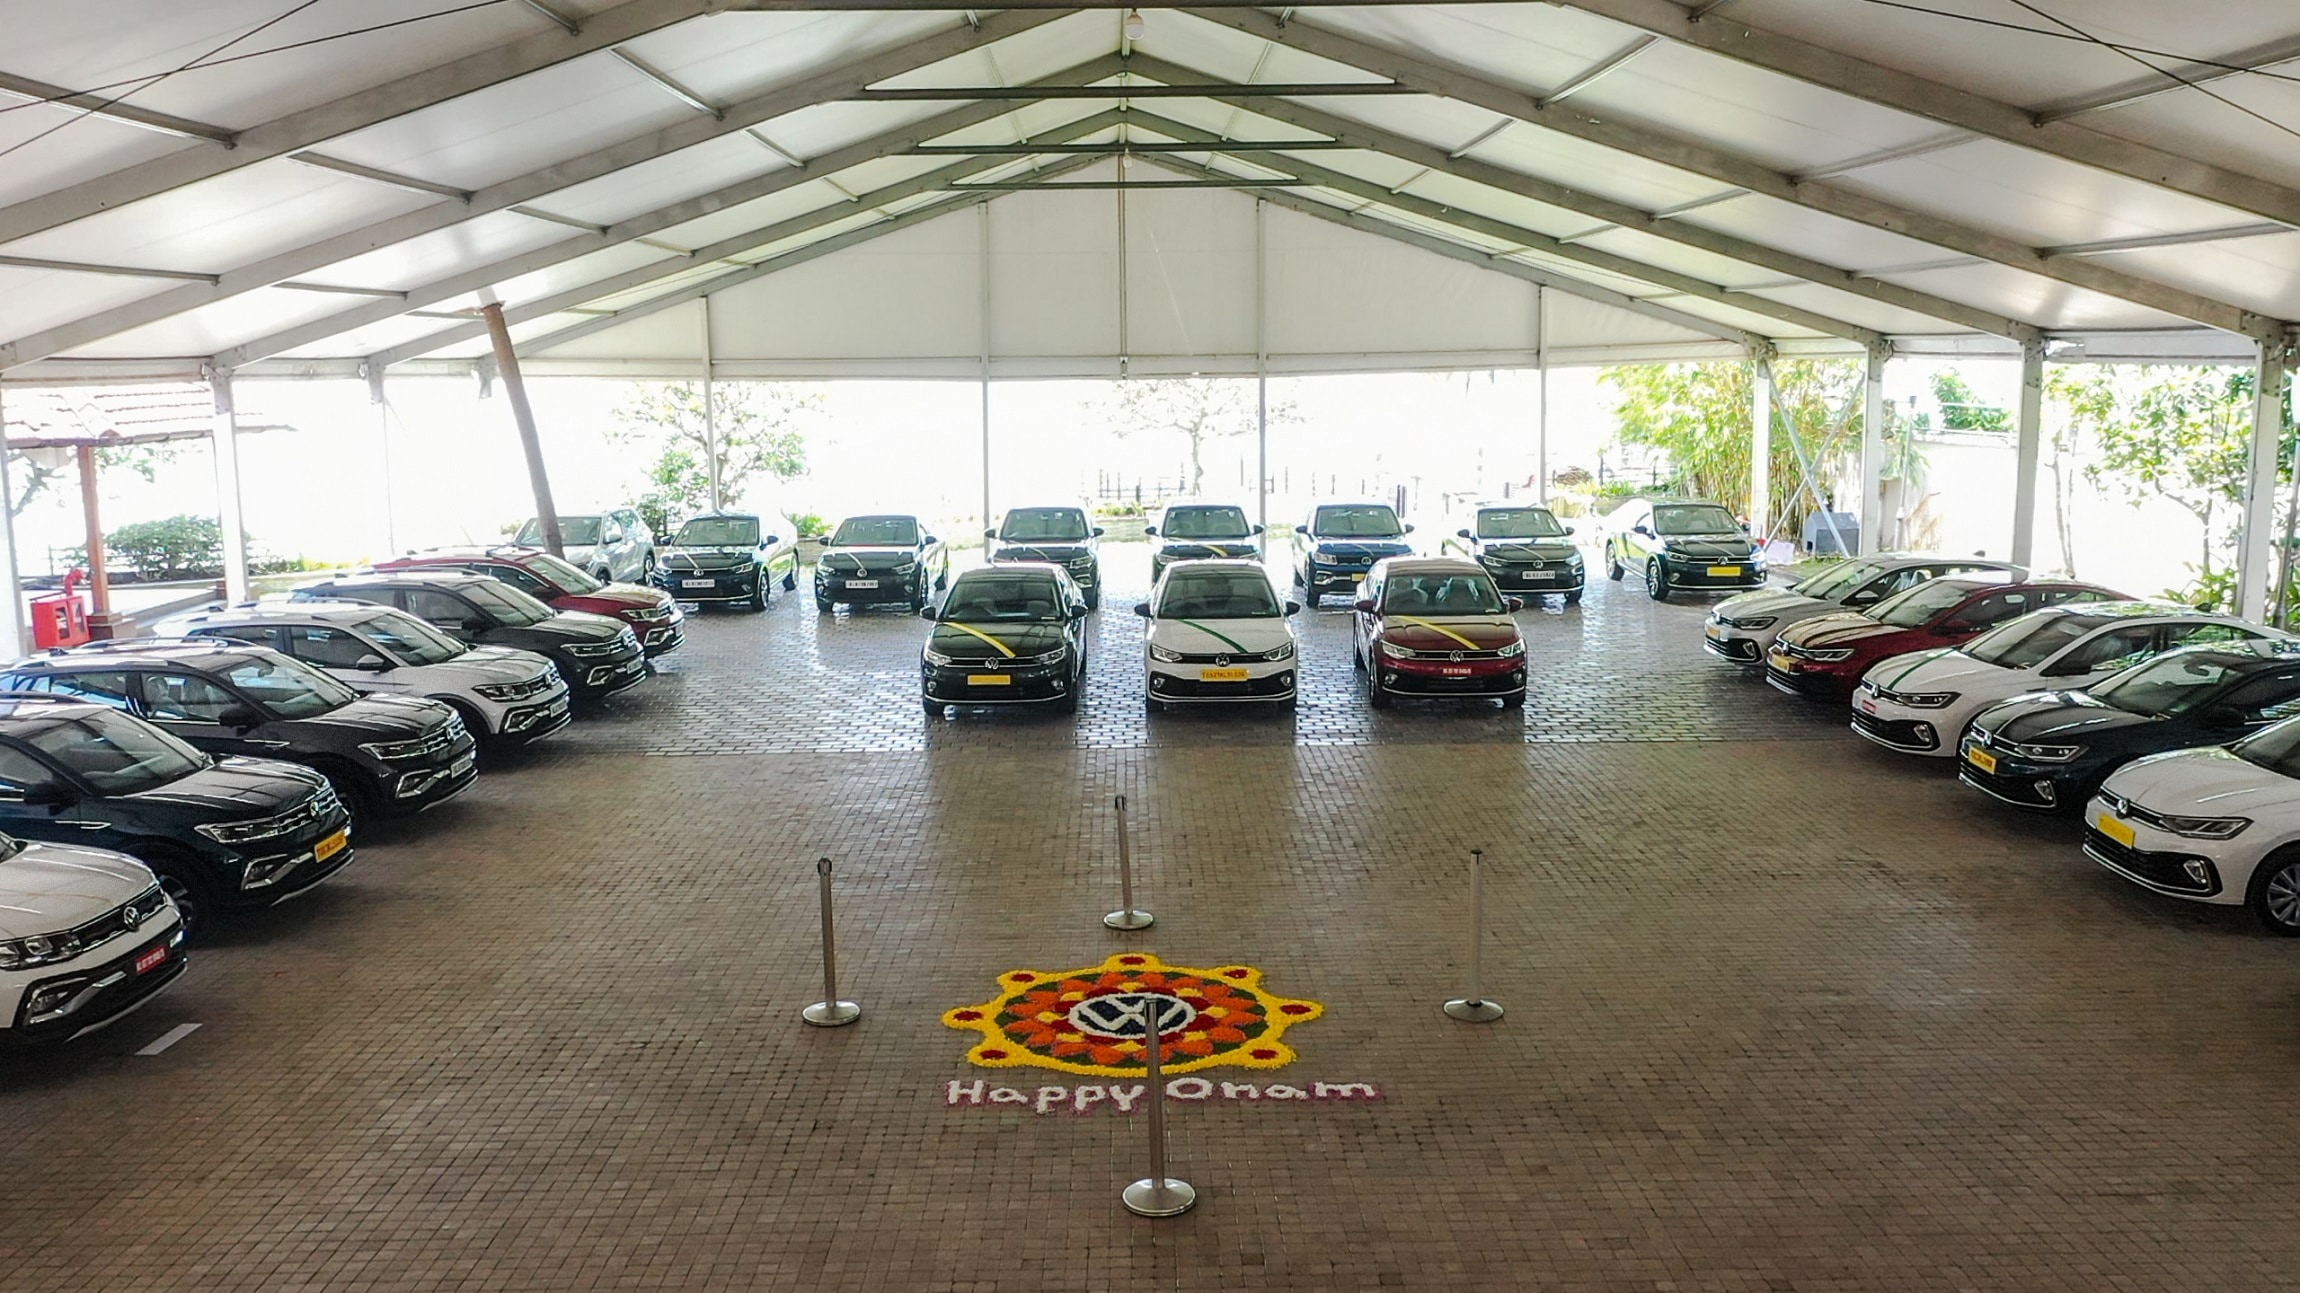 Volkswagen also delivered an additional 50 pre-owned cars to customers under its Das WeltAuto (DWA) used car business